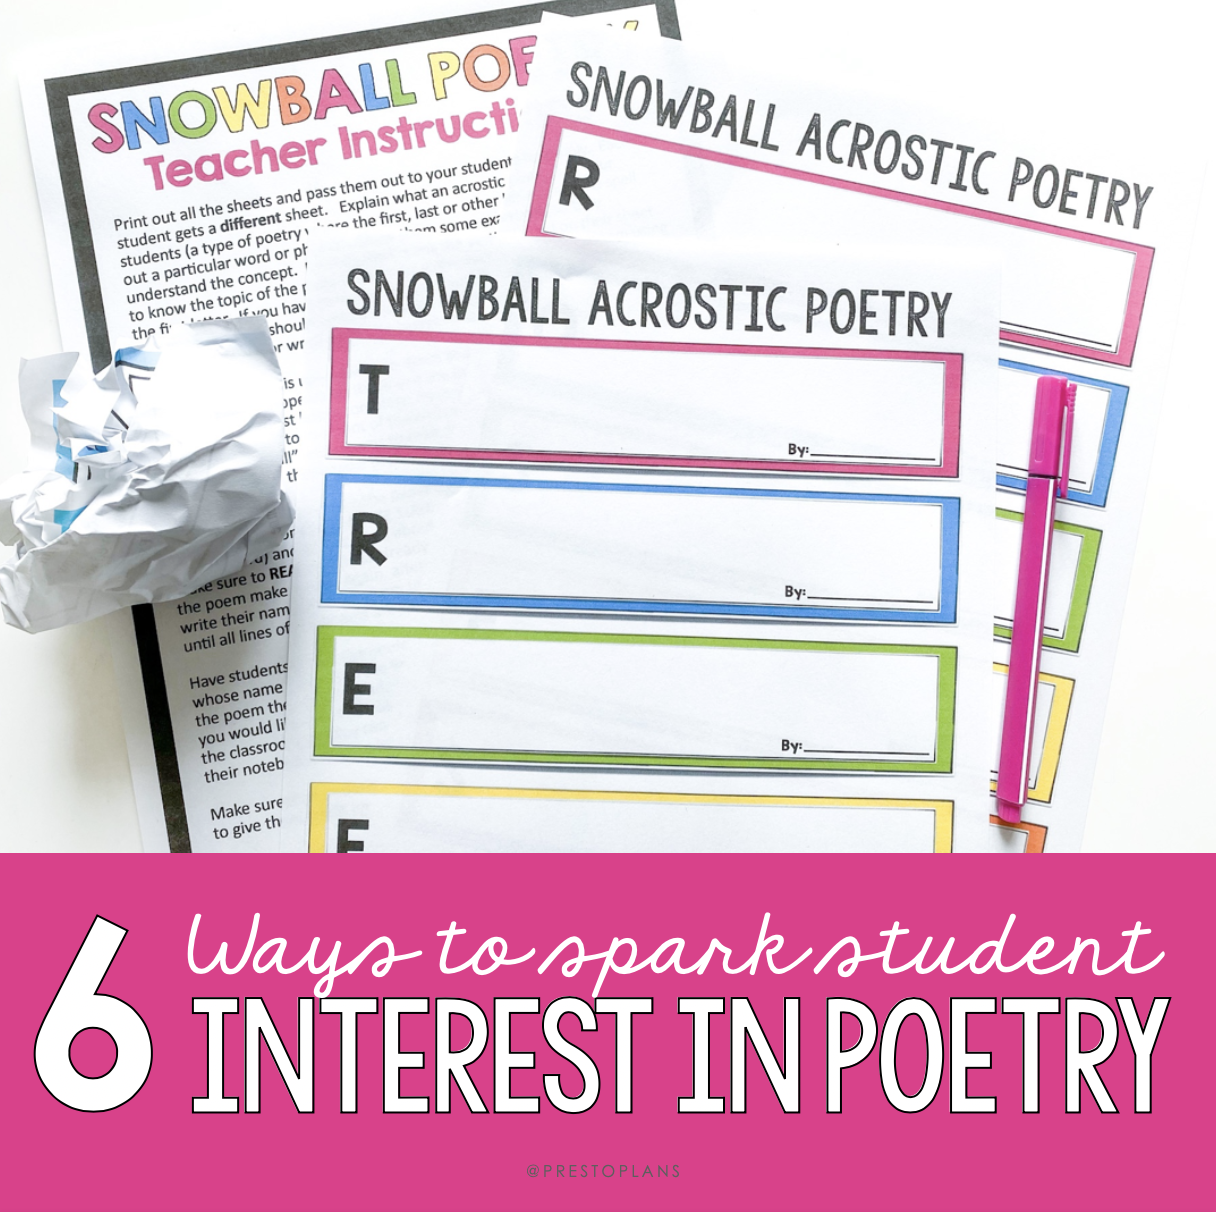 spark student interest in poetry